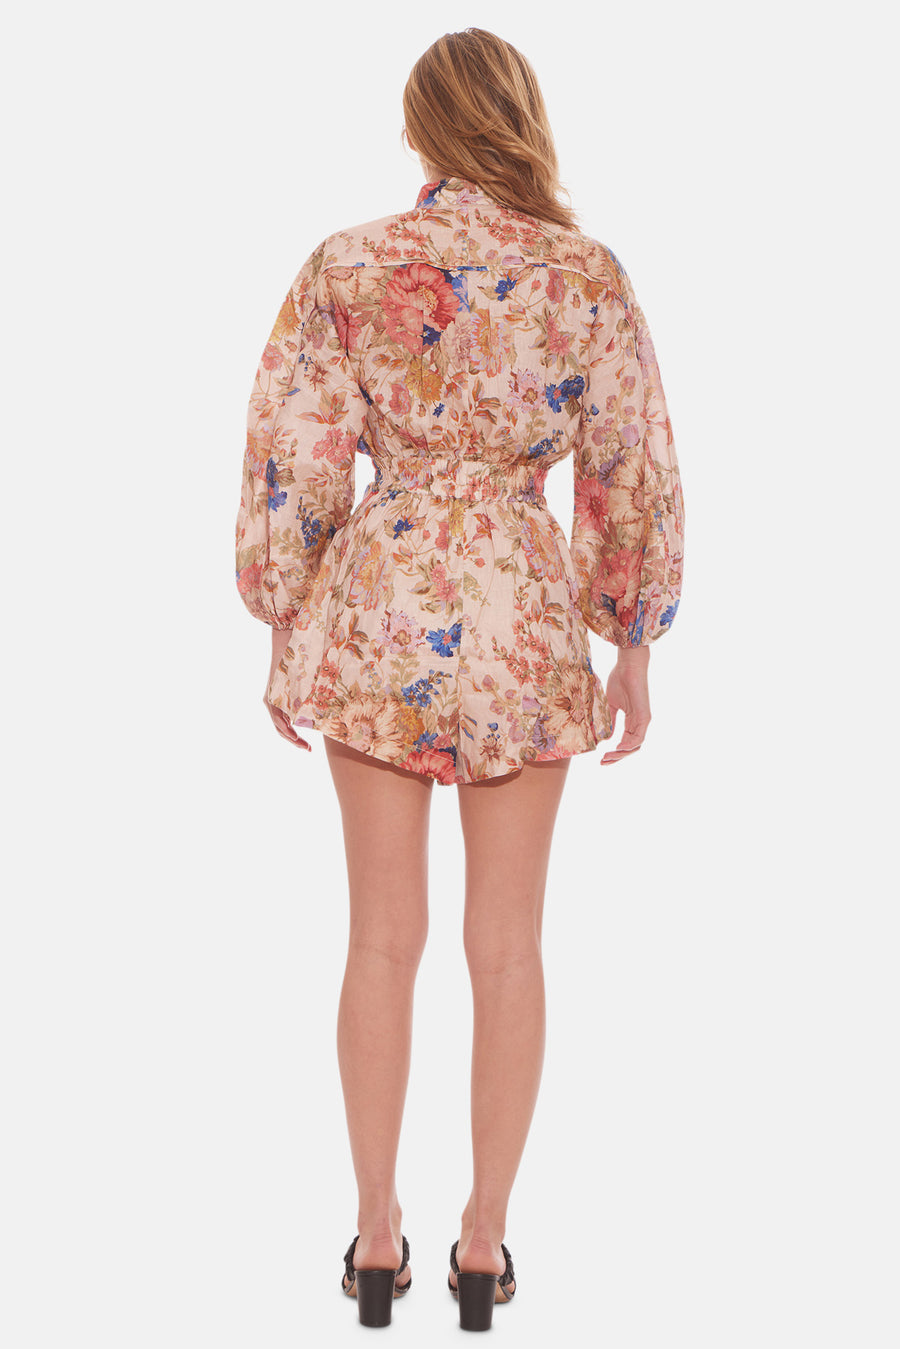 August Panelled Playsuit Cream Floral